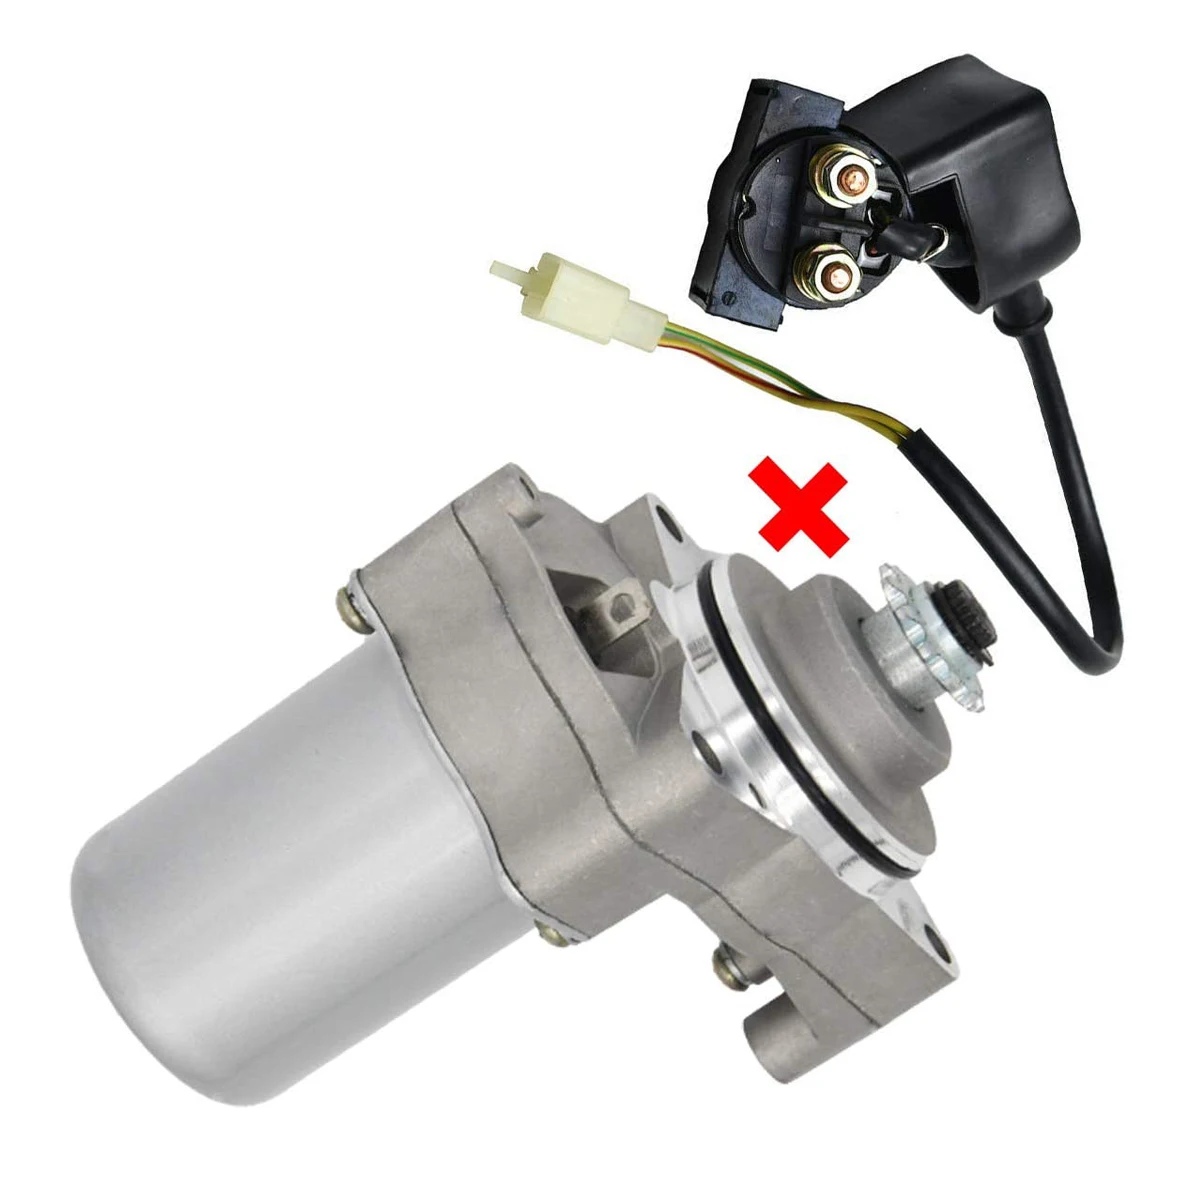 

3 Bolt Starter Motor+Solenoid Relay For Most Chinese 50cc 70cc 90cc 110cc 125cc Dirt Bikes, Go Karts and ATV